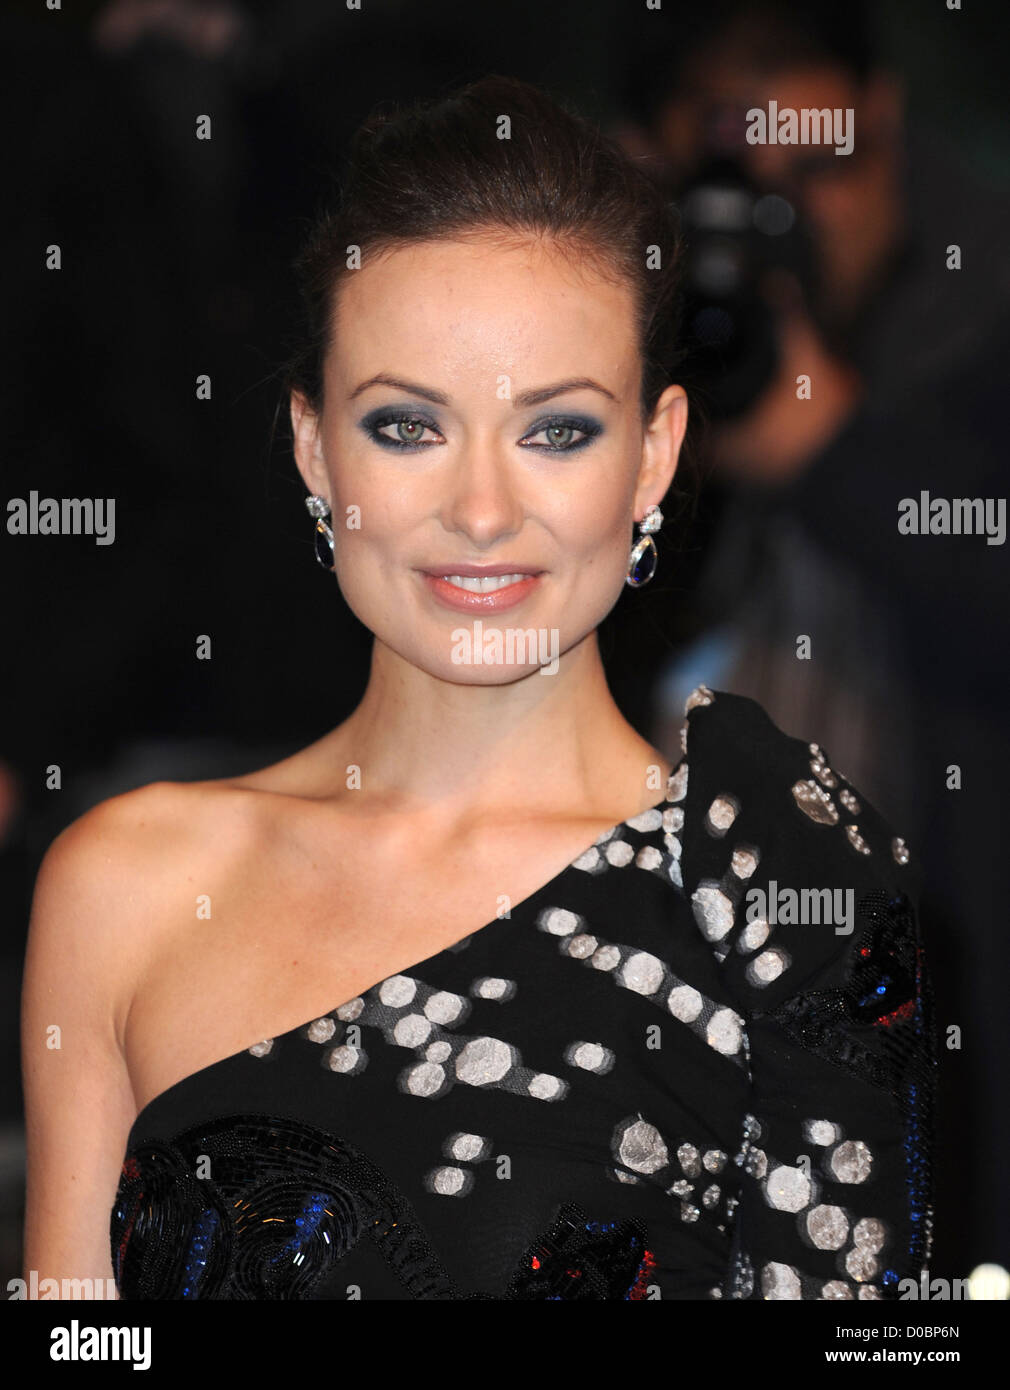 Olivia Wilde The UK premiere of 'TRON: Legacy' at the Empire Leicester Square London, England - 05.12.10 Stock Photo